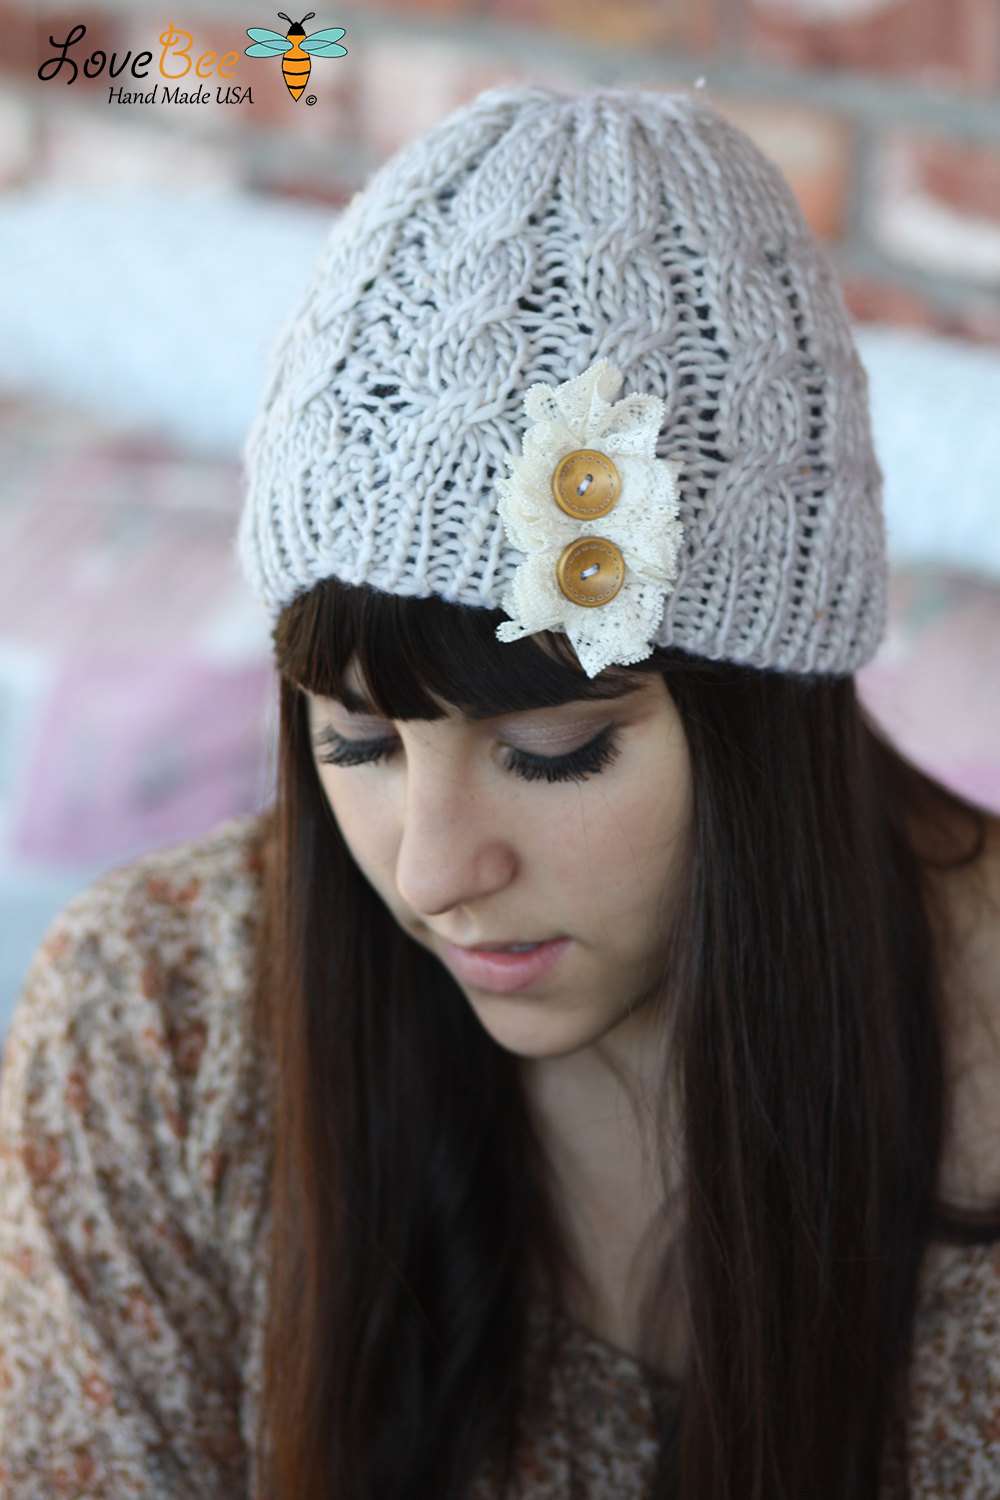 Beanie Hat- , Light Gray, Accordion Lace , Wood Buttons, Cable Knit, Knitted, Crochet, Ivory Lace, Christmas Gift.